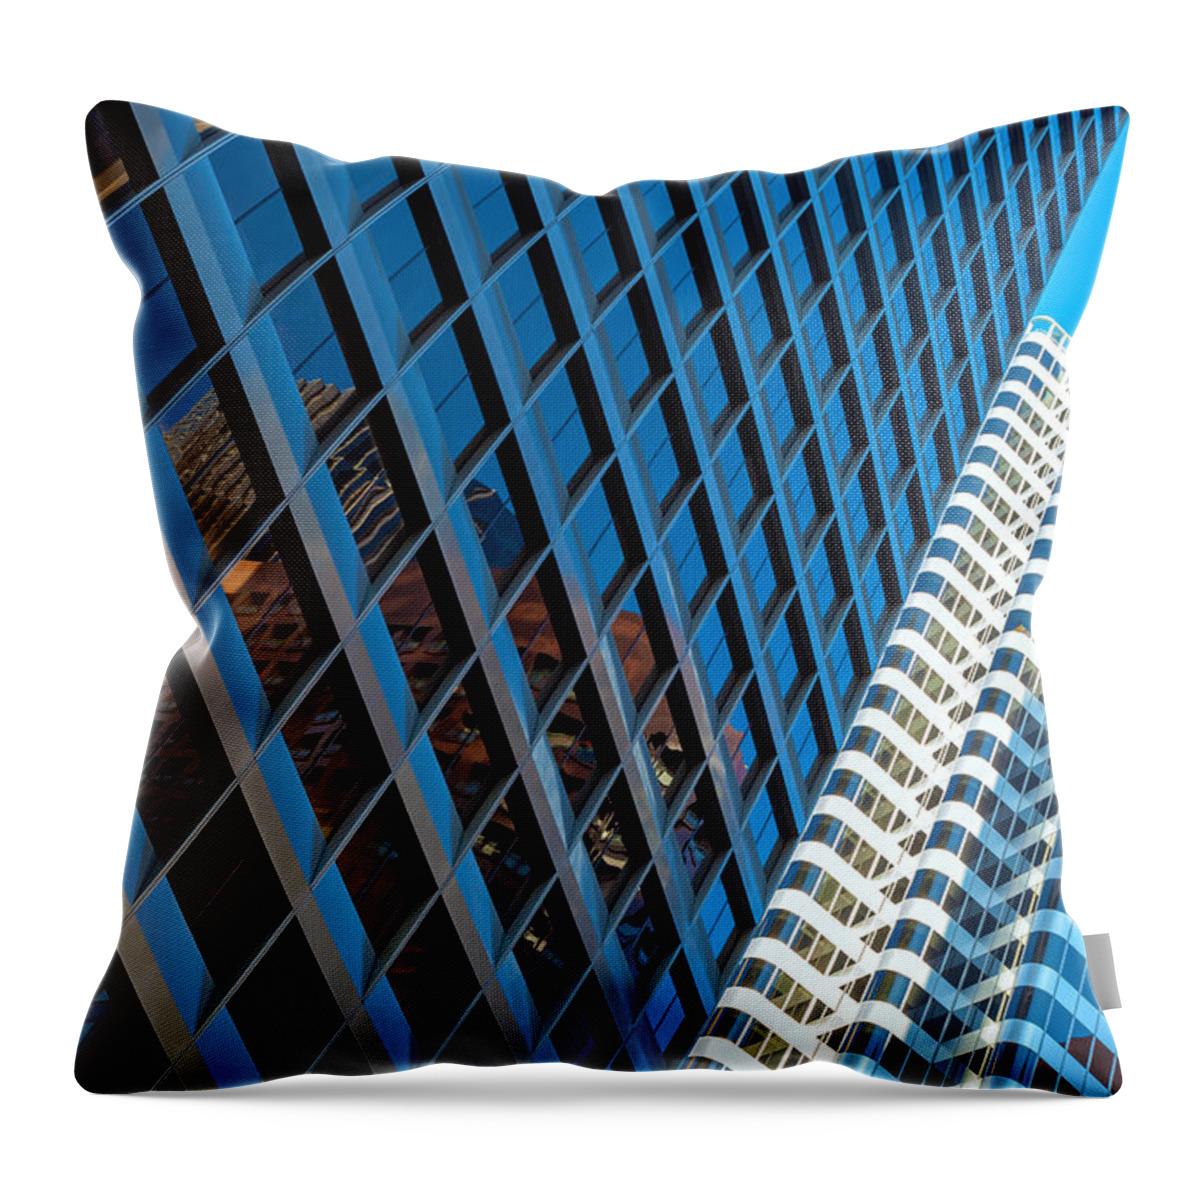 City Throw Pillow featuring the photograph City Structures by Jonathan Nguyen